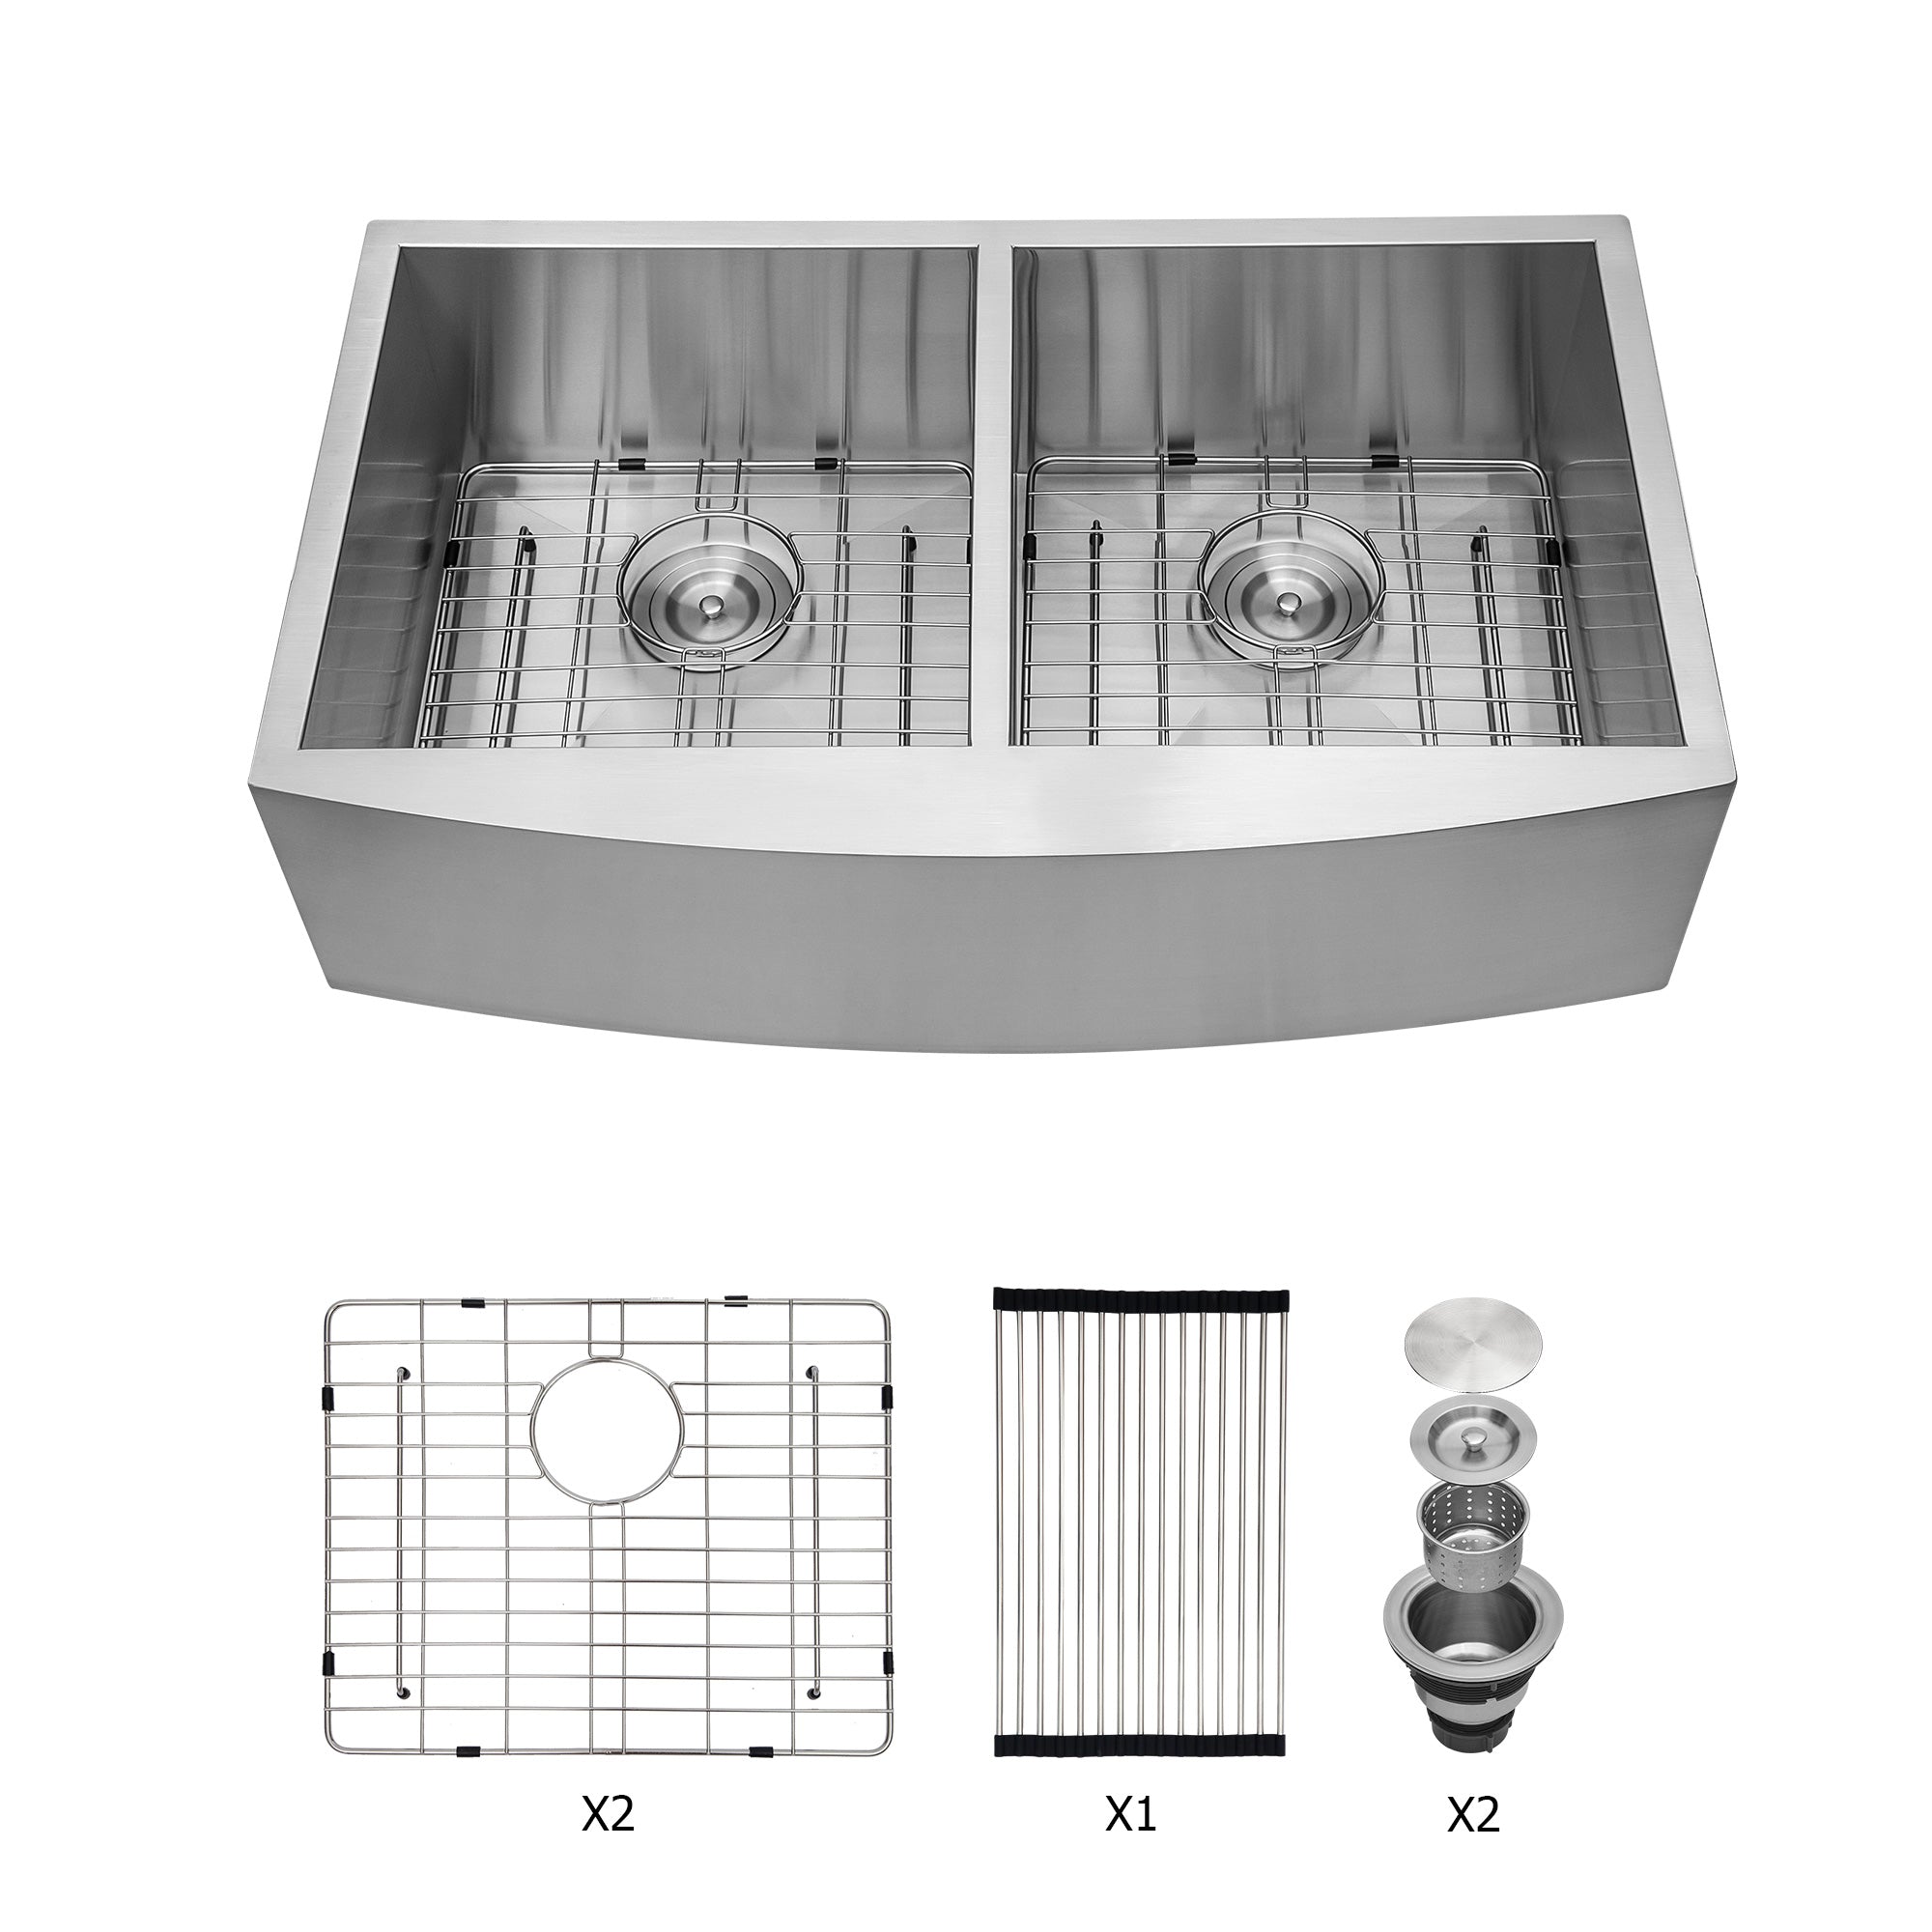 Lordear Farmhouse Double Bowl Sink - 36 Inch Stainless Steel Double Sink 18 Gauge 50/50 Double Bowl Kitchen Sink 36x20x9 Inches Apron Front Sink from Lordear